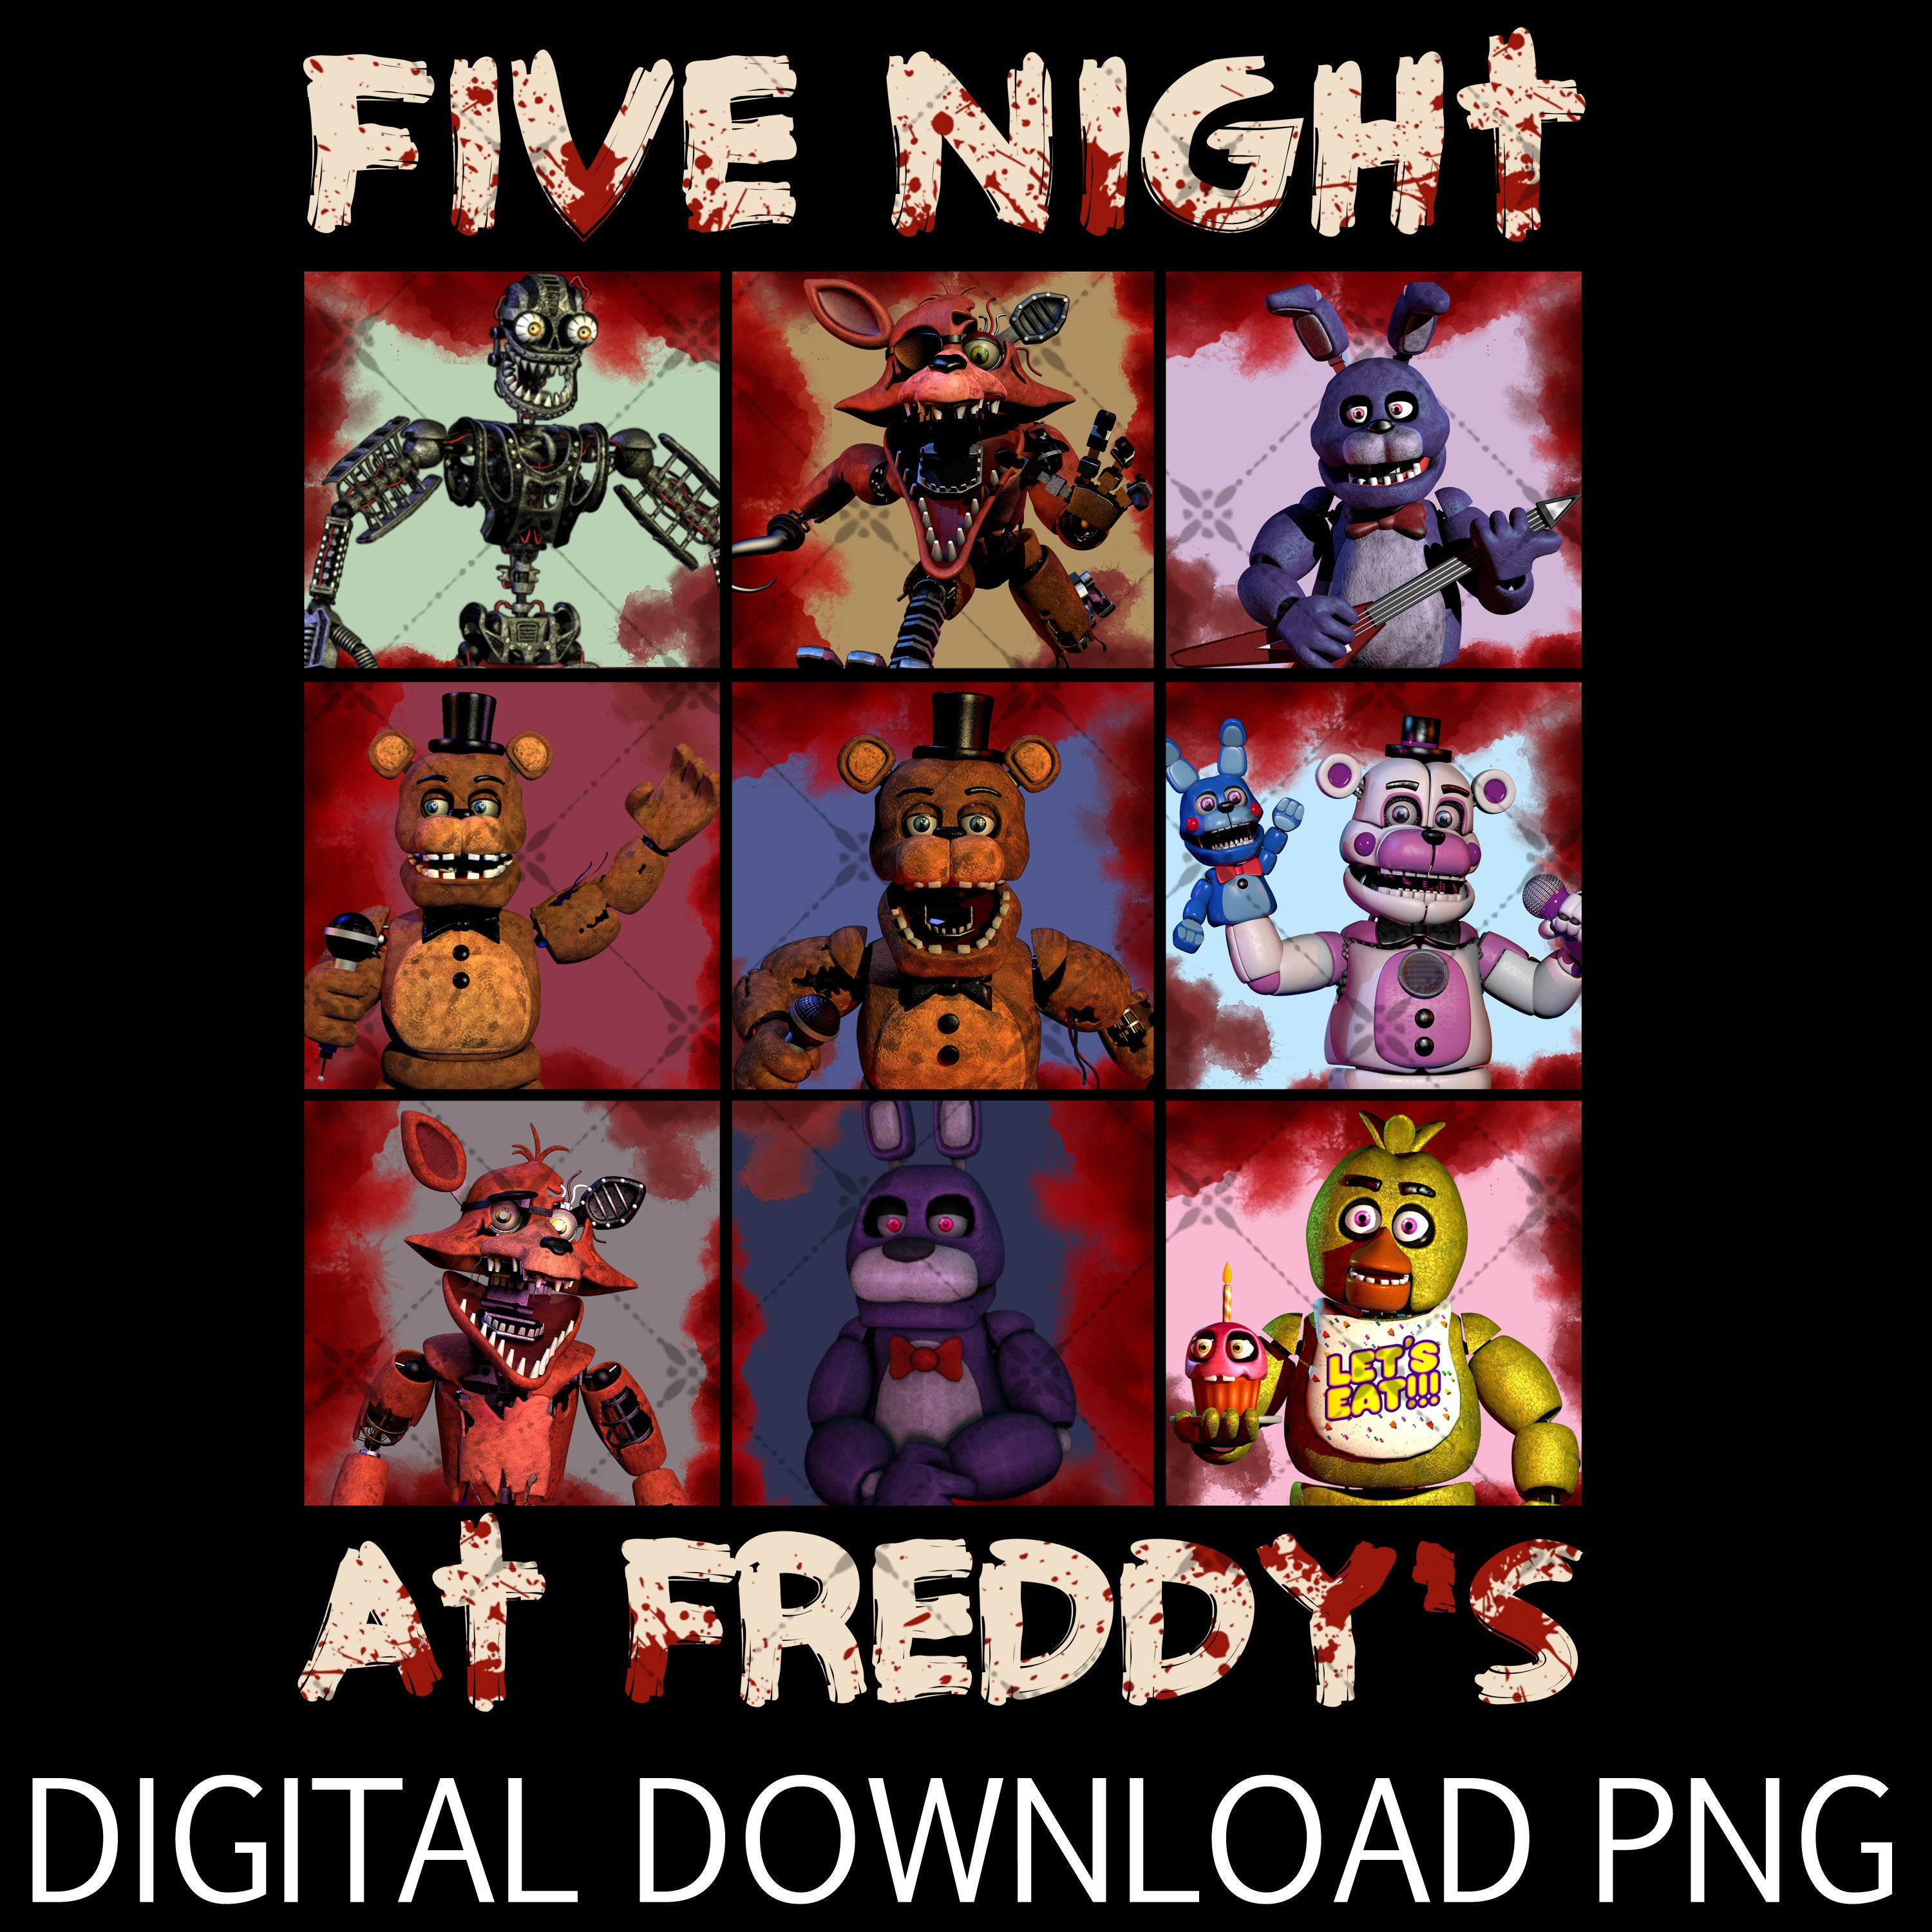 Five Nights at Freddy's Invitation Chalkboard - FNAF Birthday Party - 5  Nights at Freddy's Invite - 5 Nights Freddys Video Game Party 100817